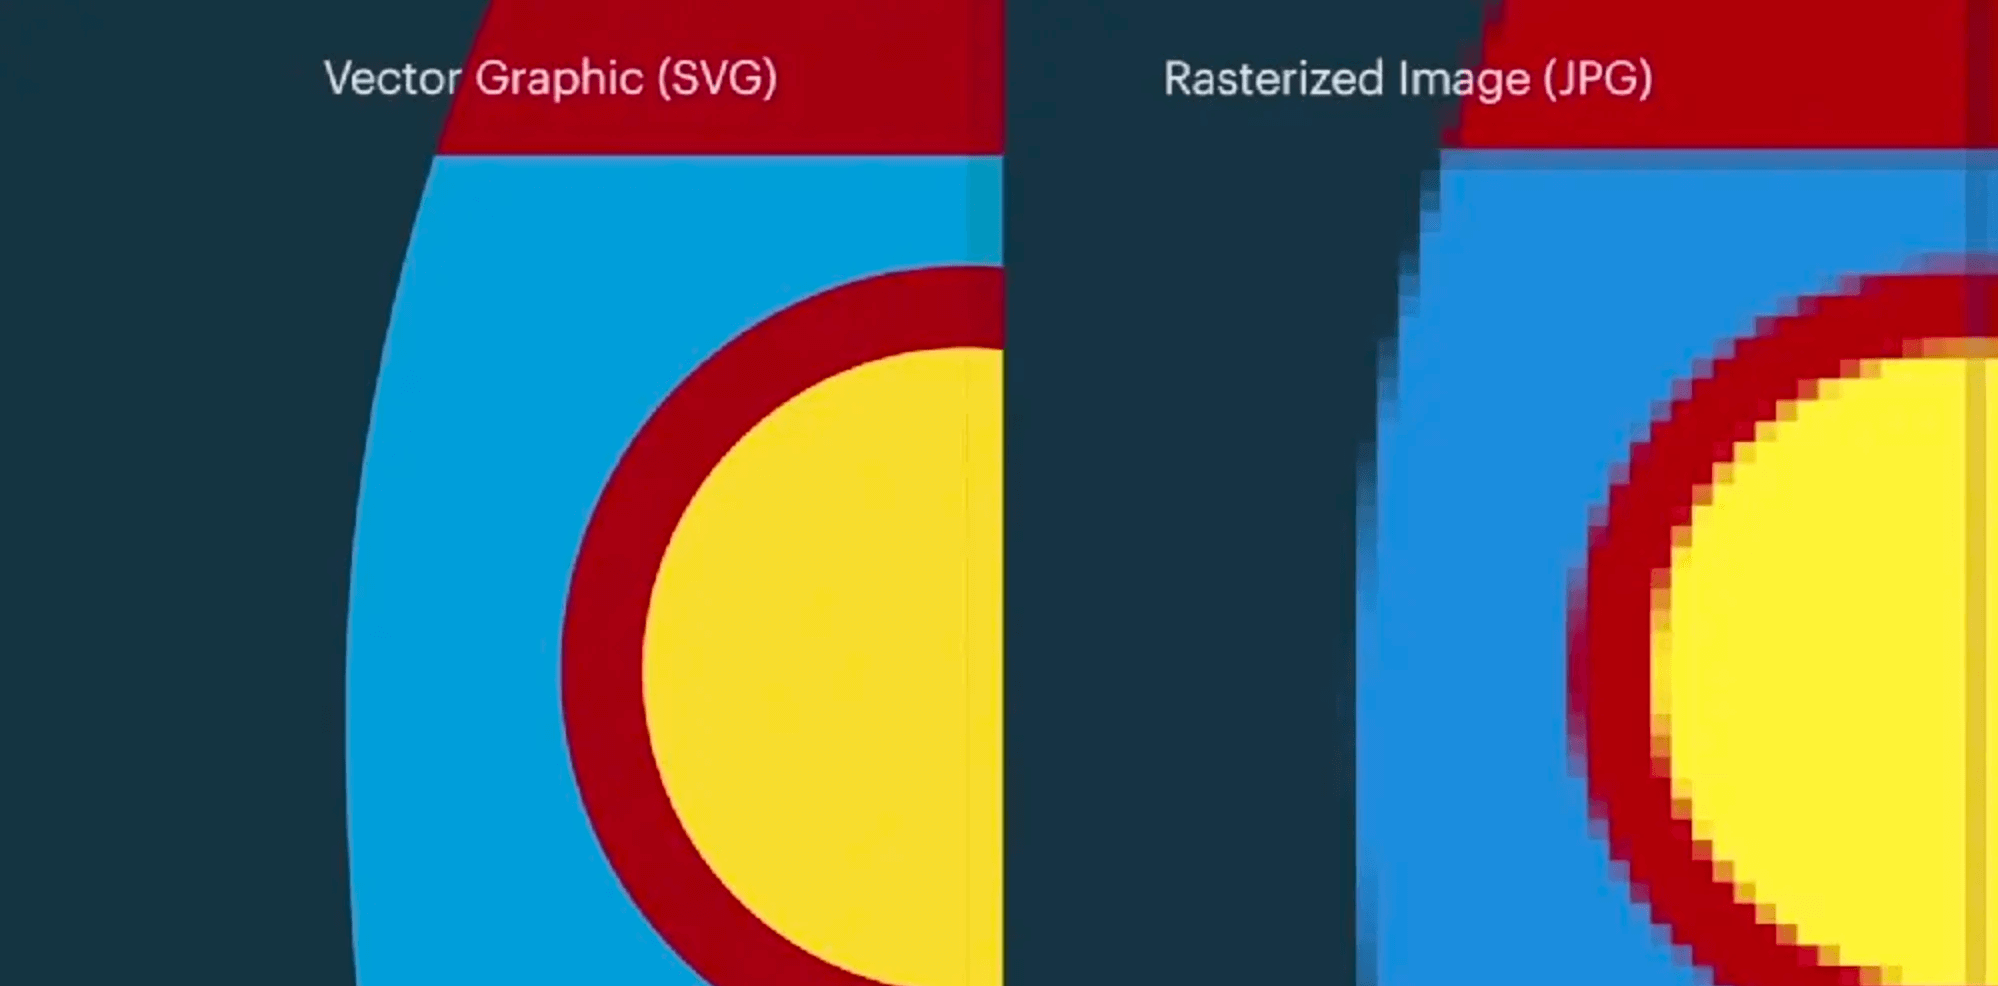 Comparison of the clarity between SVG and JPEG images